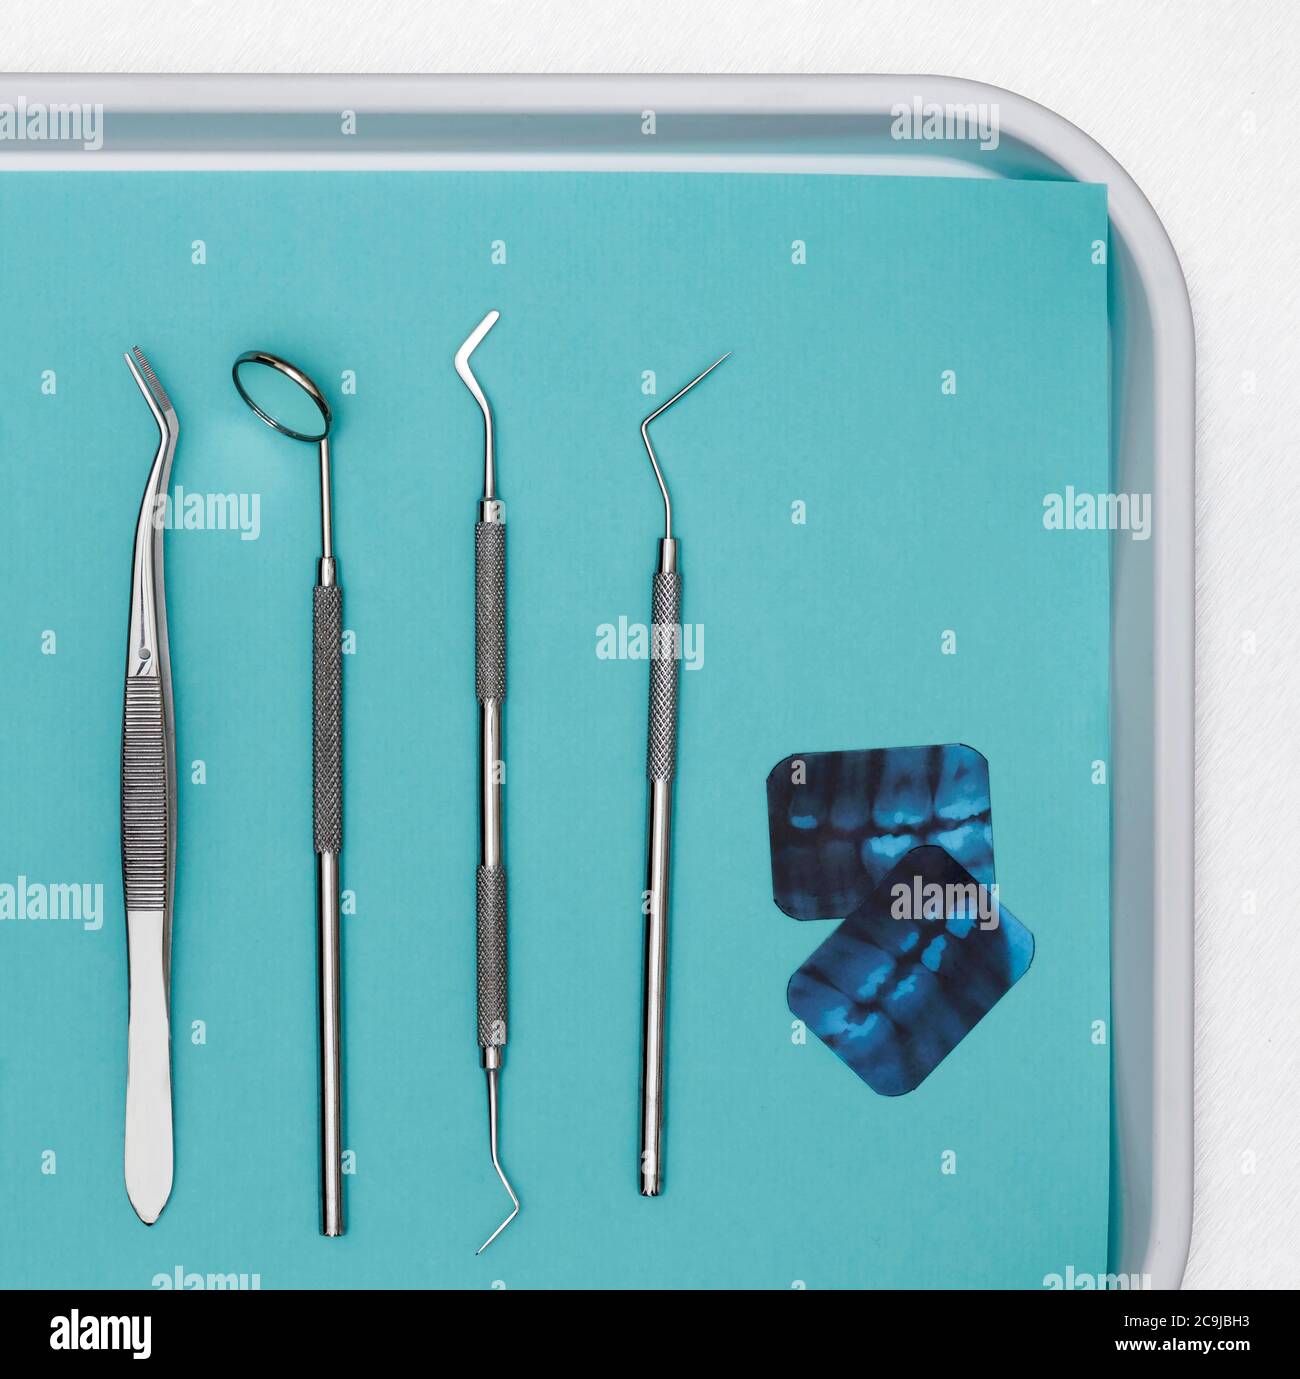 Dental equipment in a tray. Stock Photo